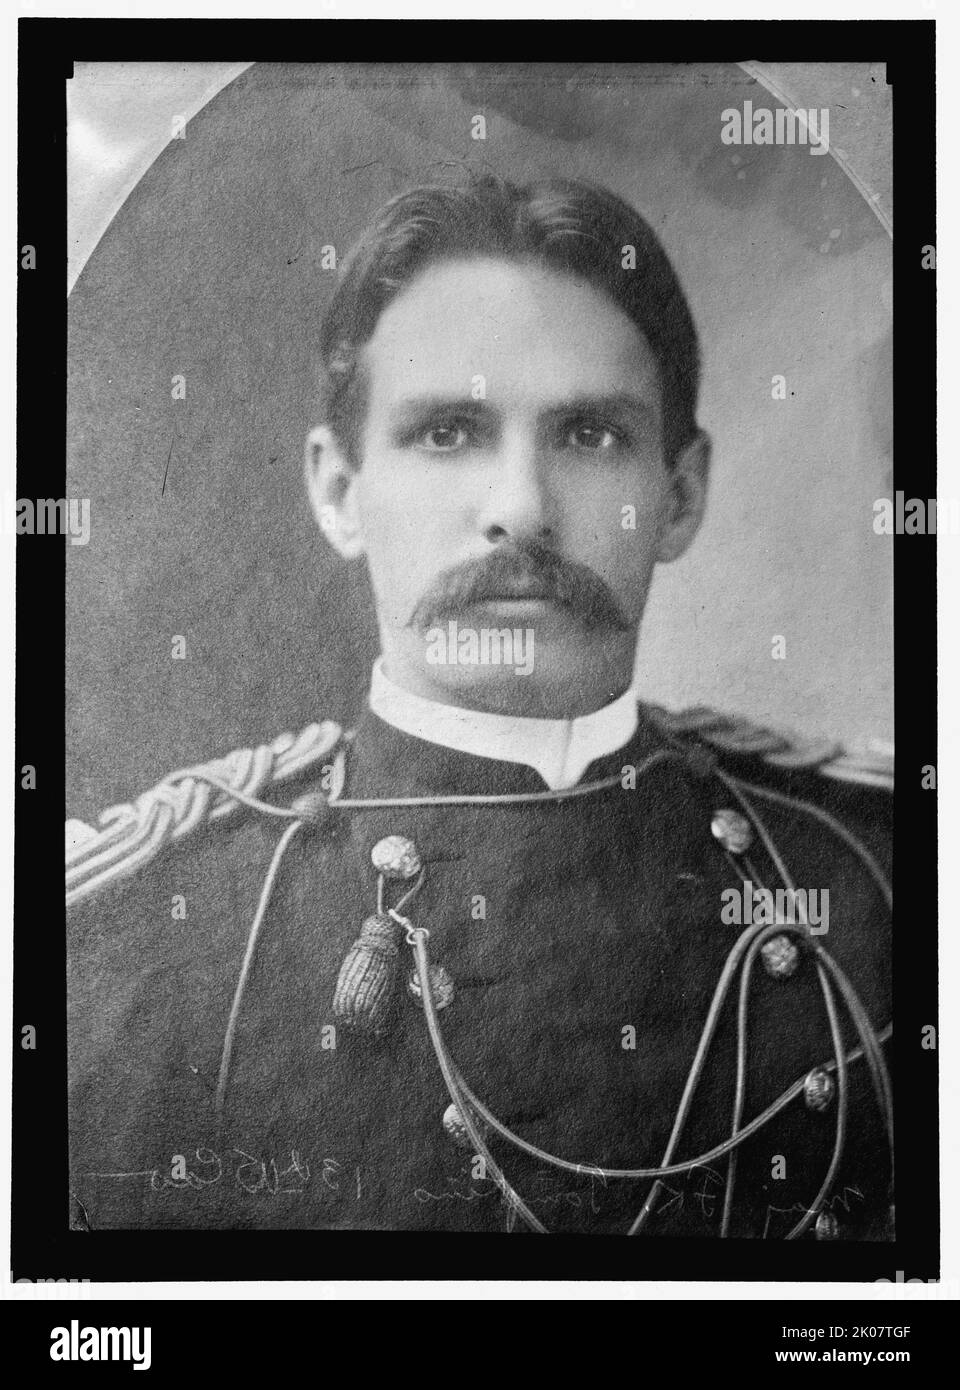 Major F. K. Tomkins, 13th U.S. Cavalry, between 1909 and 1923. US Army officer Frank Tomkins served with distinction during the Mexican Punitive Expedition and was awarded the Distinguished Service Cross. Also fought in the Spanish-American War in Cuba, the Philippine-American War, the Mexican Border War, and World War I. Stock Photo